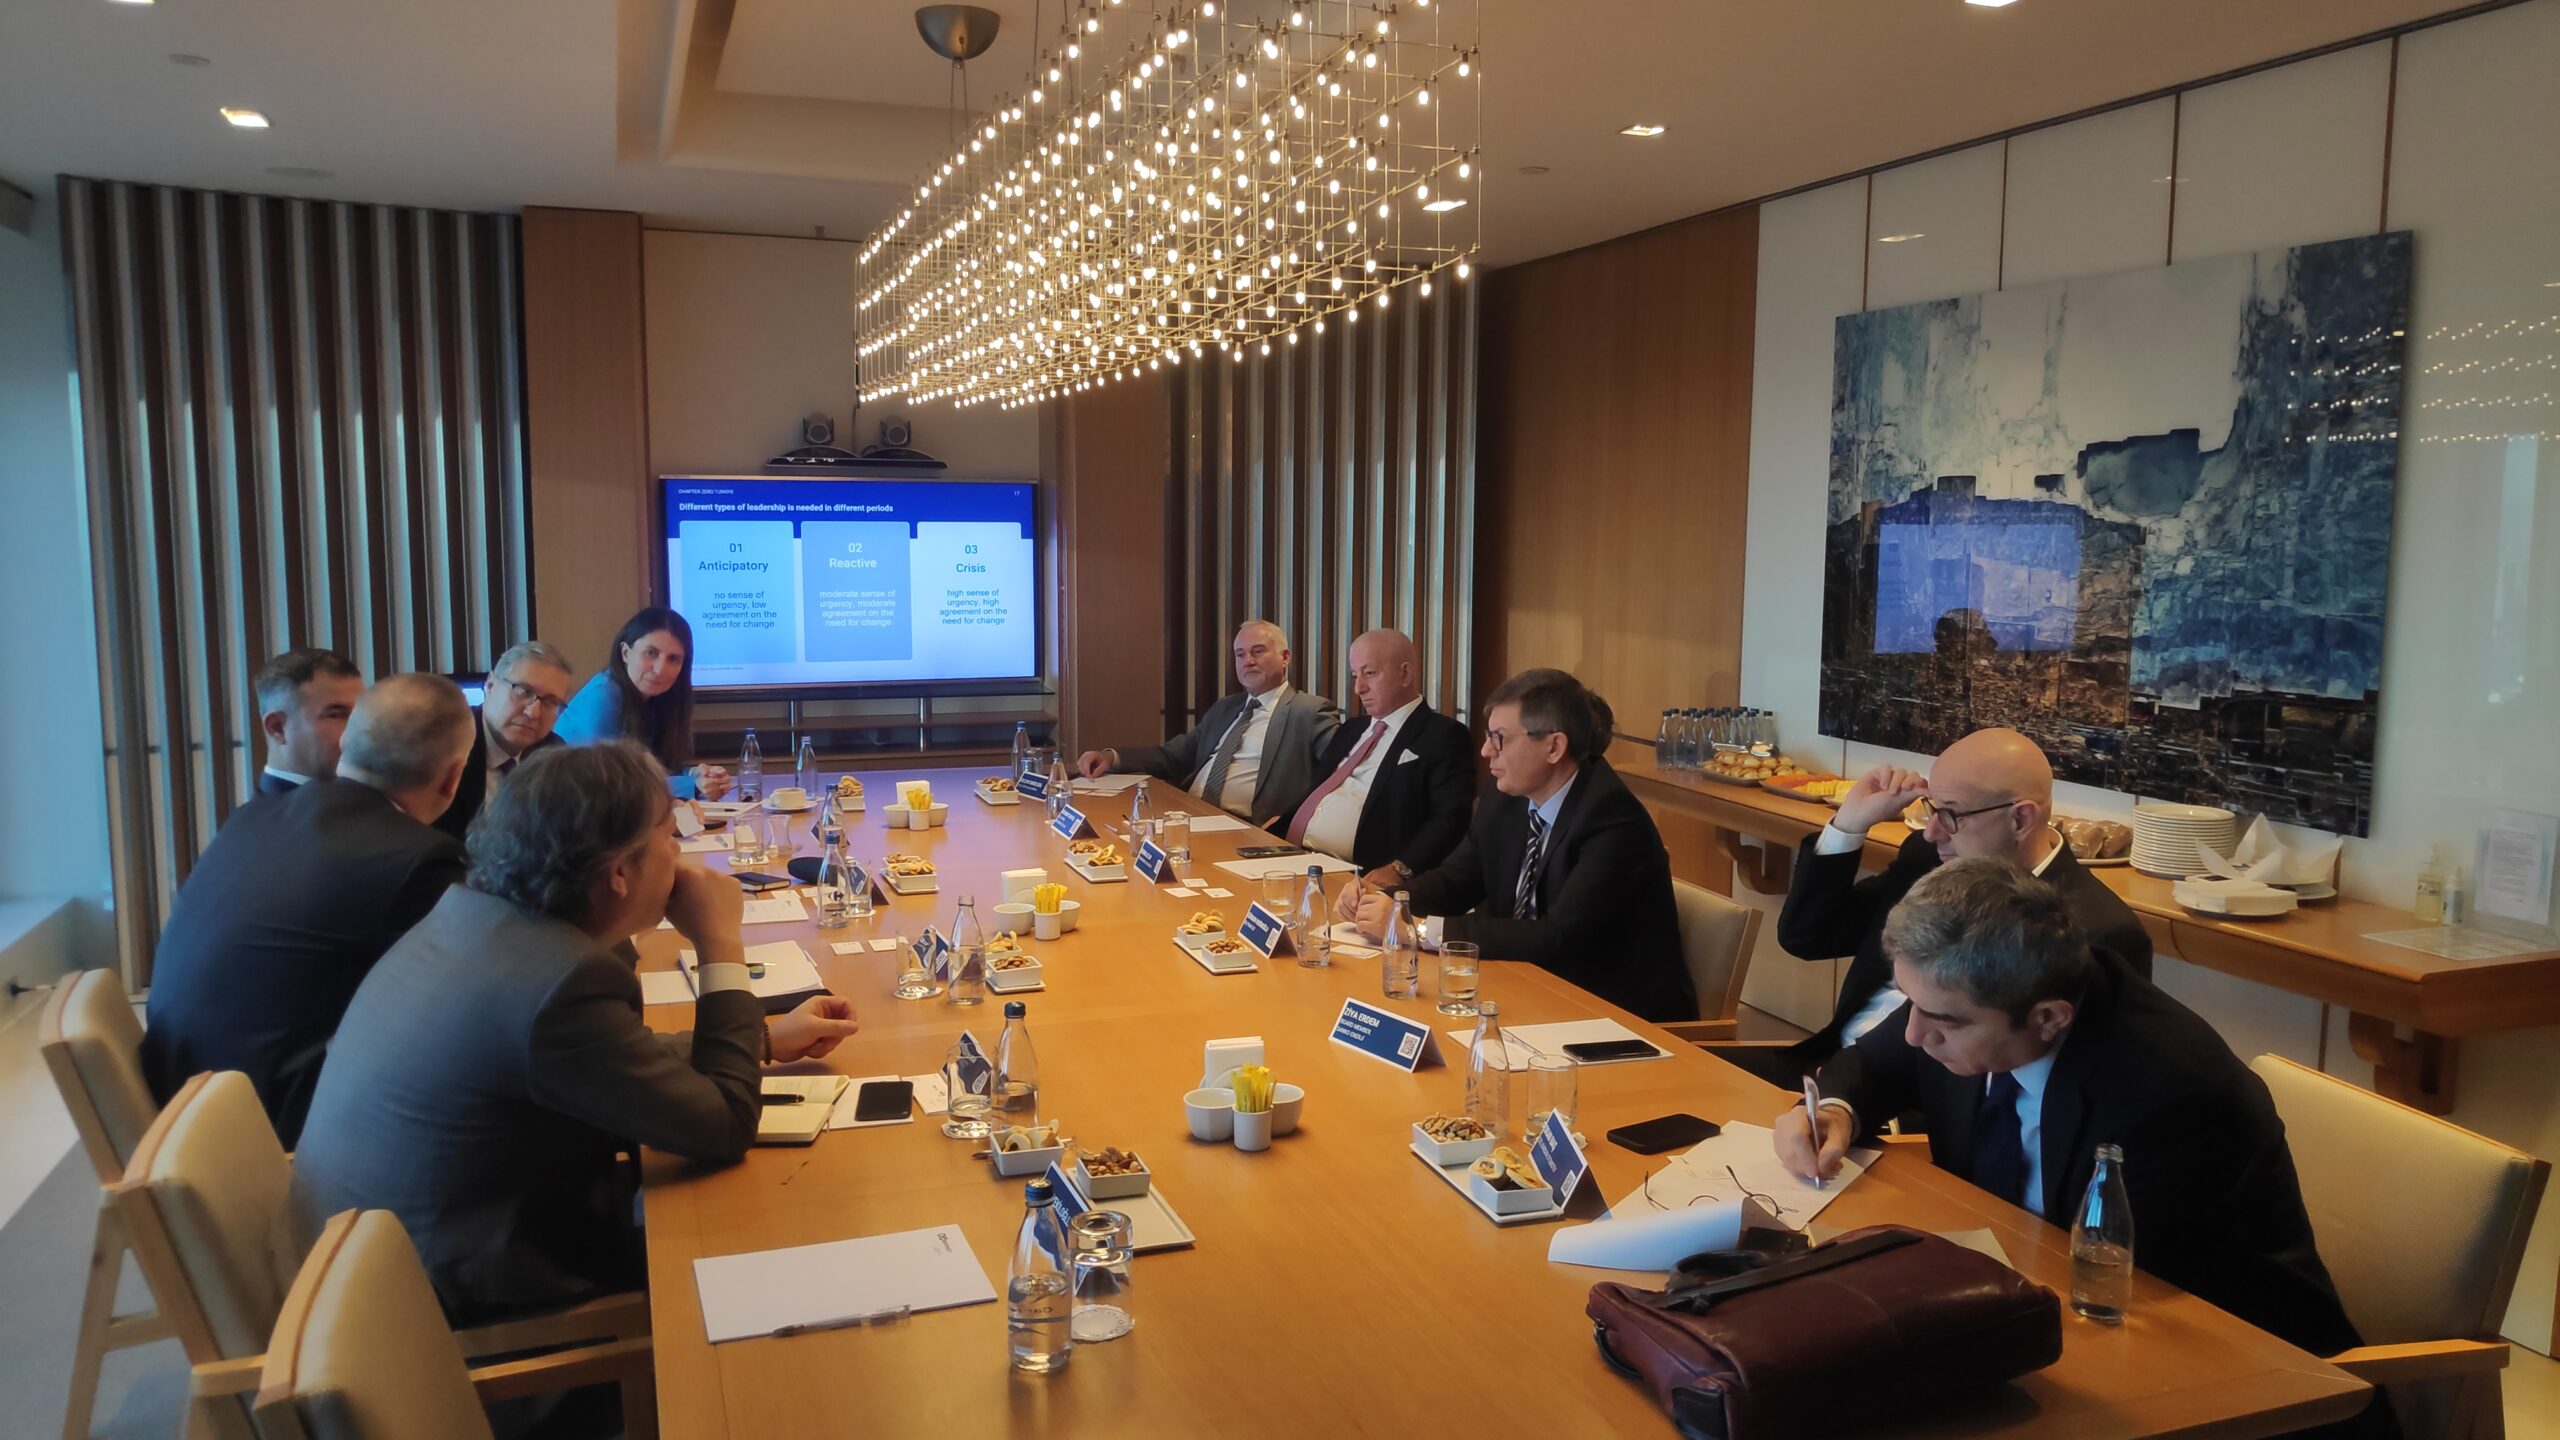 TÜSİAD and Chapter Zero Türkiye held a roundtable meeting with high-level participation, hosted by Sabancı Holding